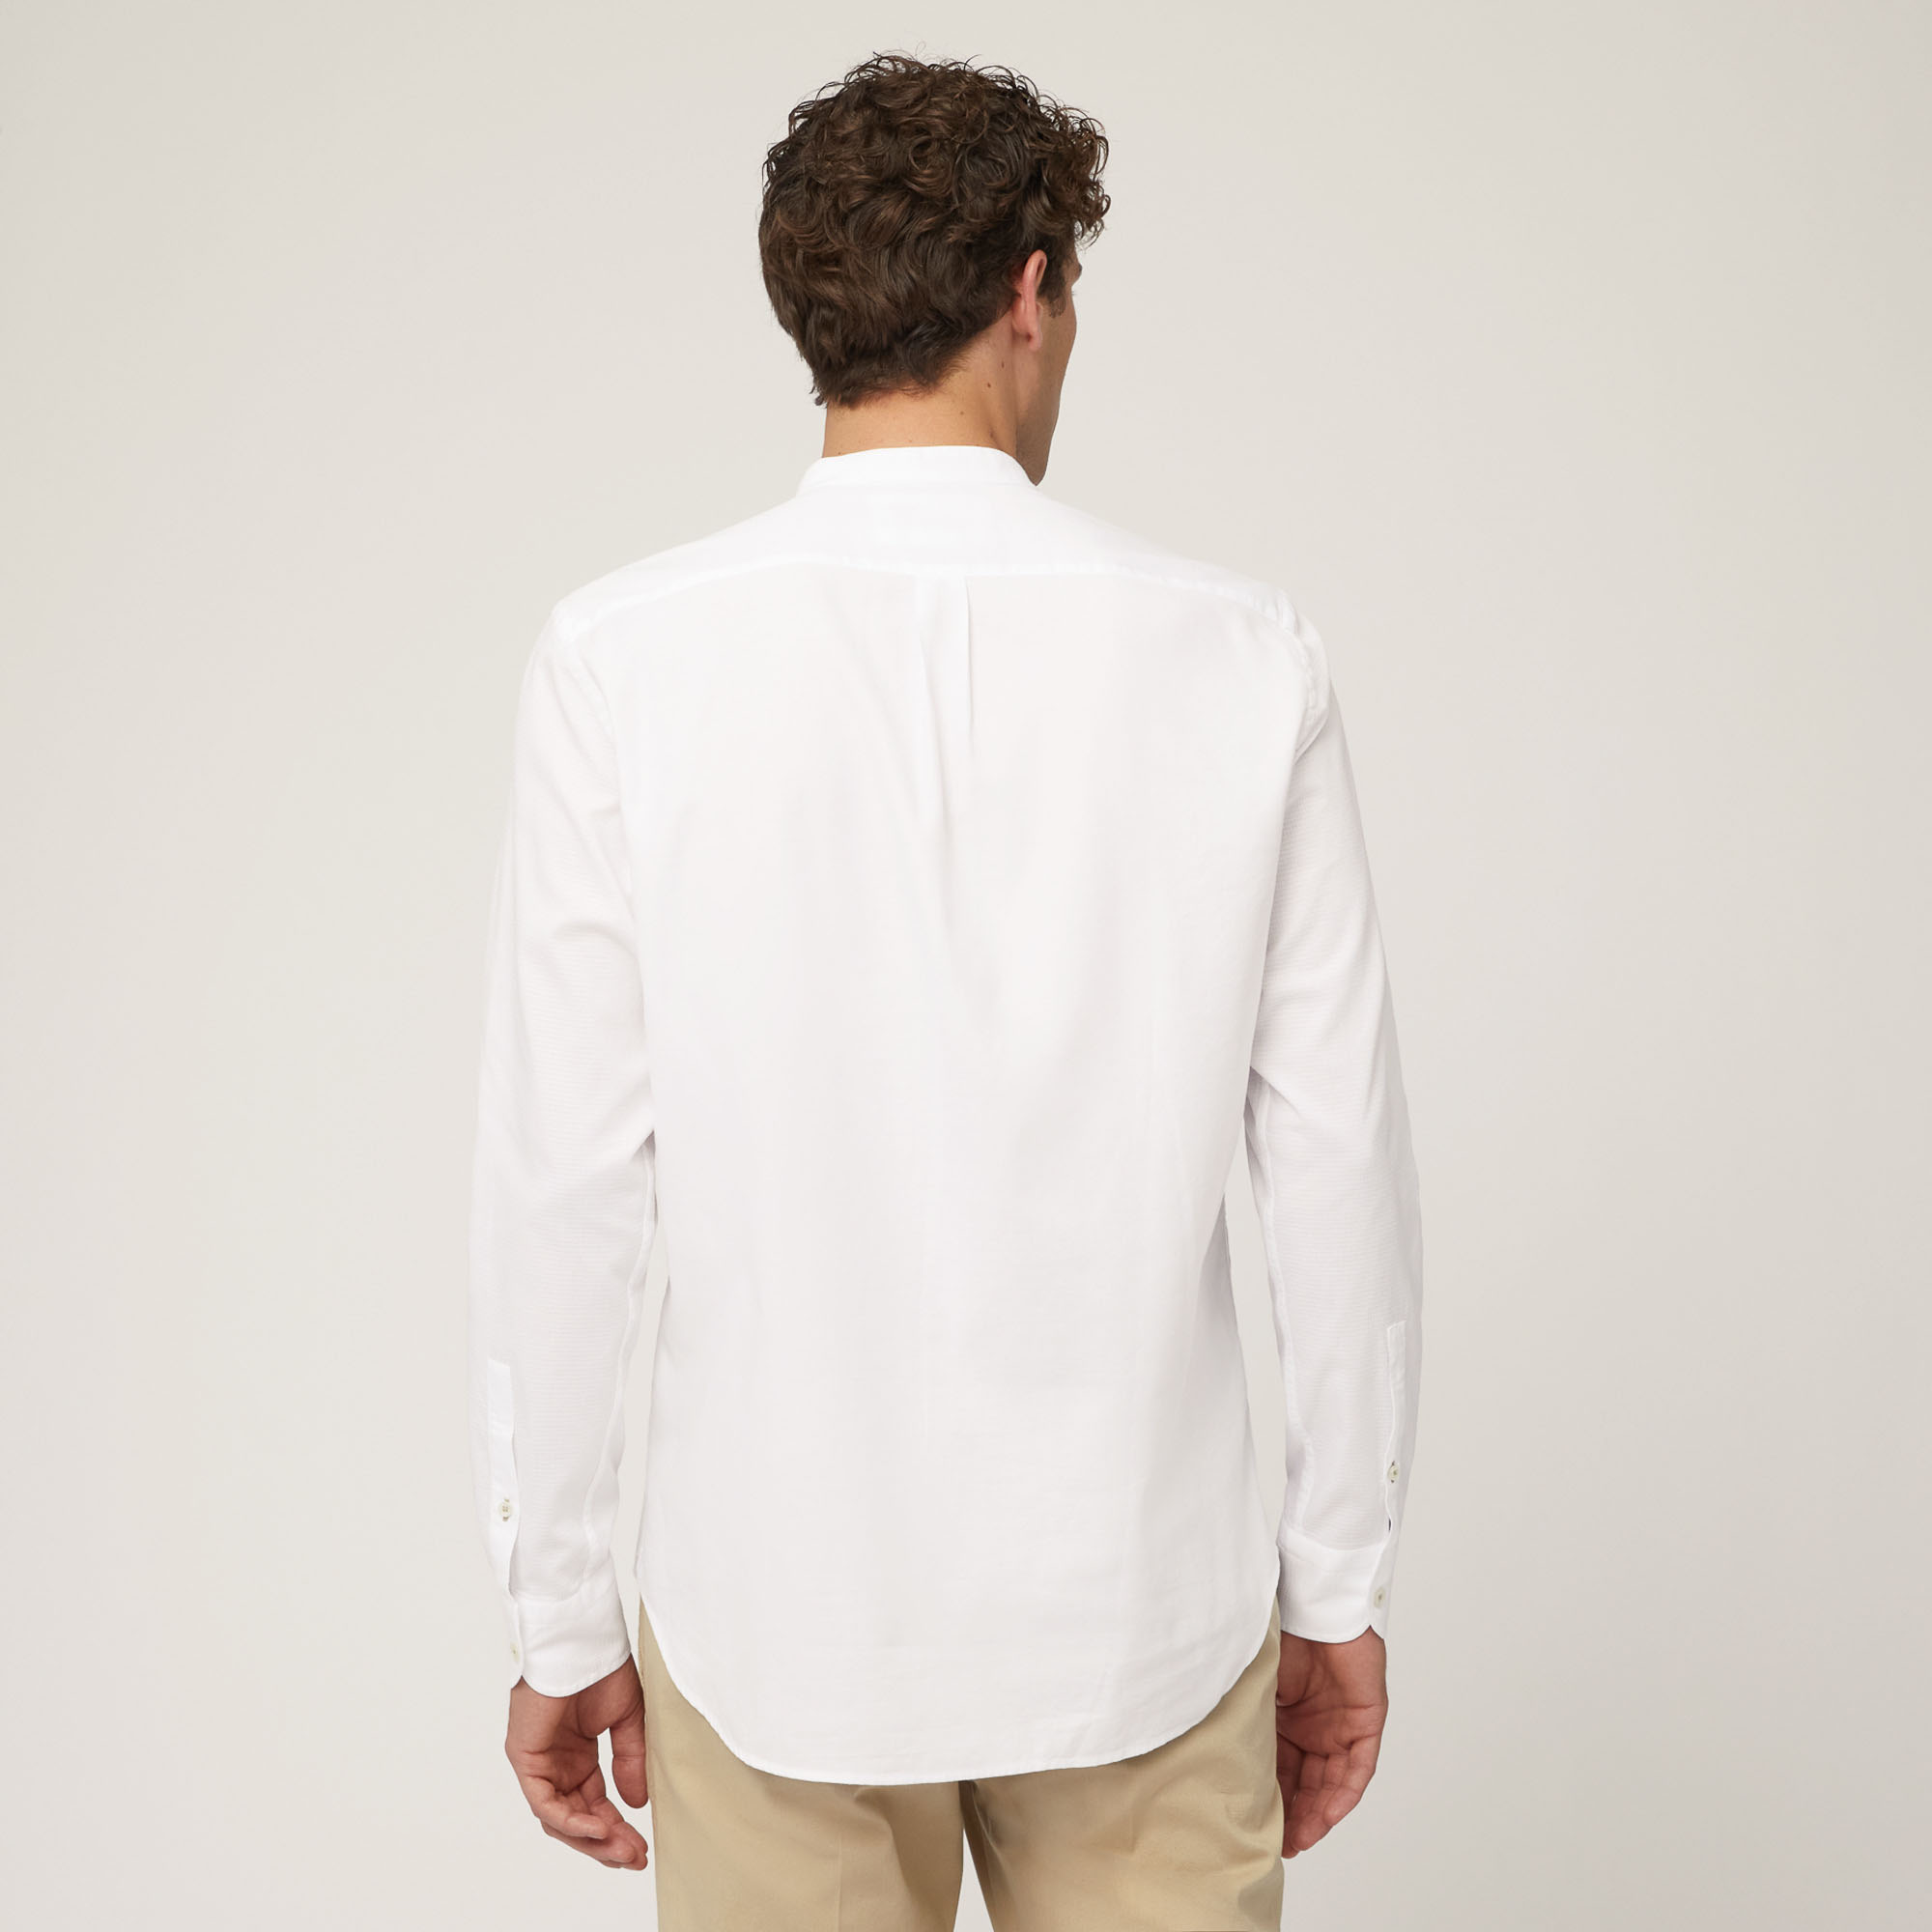 Woven Cotton Shirt with Mandarin Collar and Breast Pocket, White, large image number 1